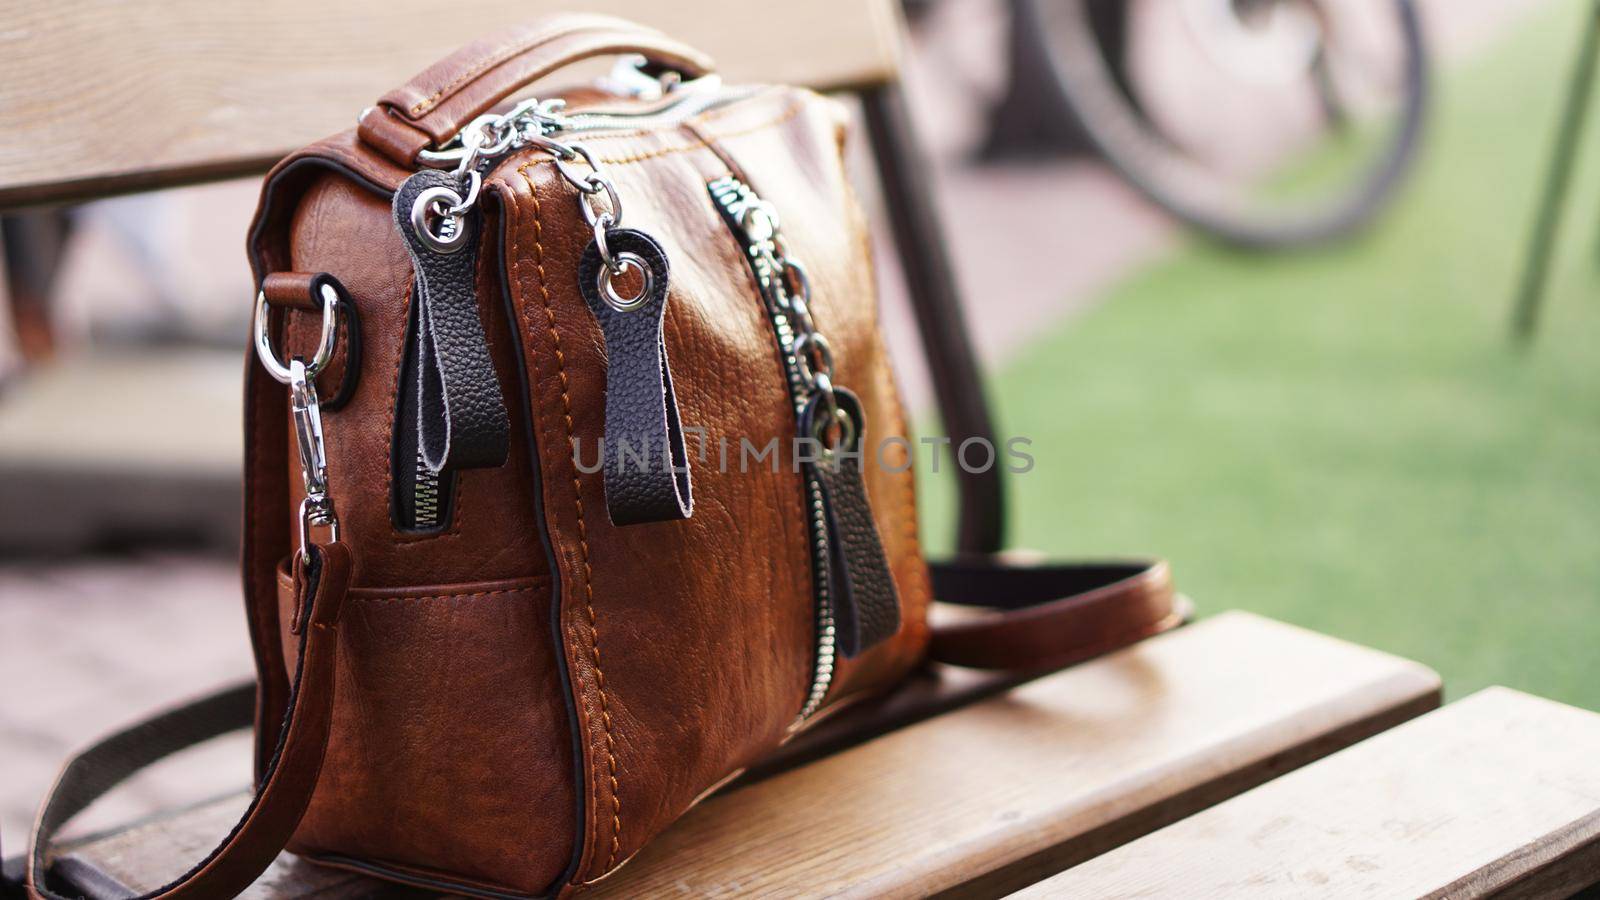 Brown leather bag outside. Blurred summer background. City walk or travel concept